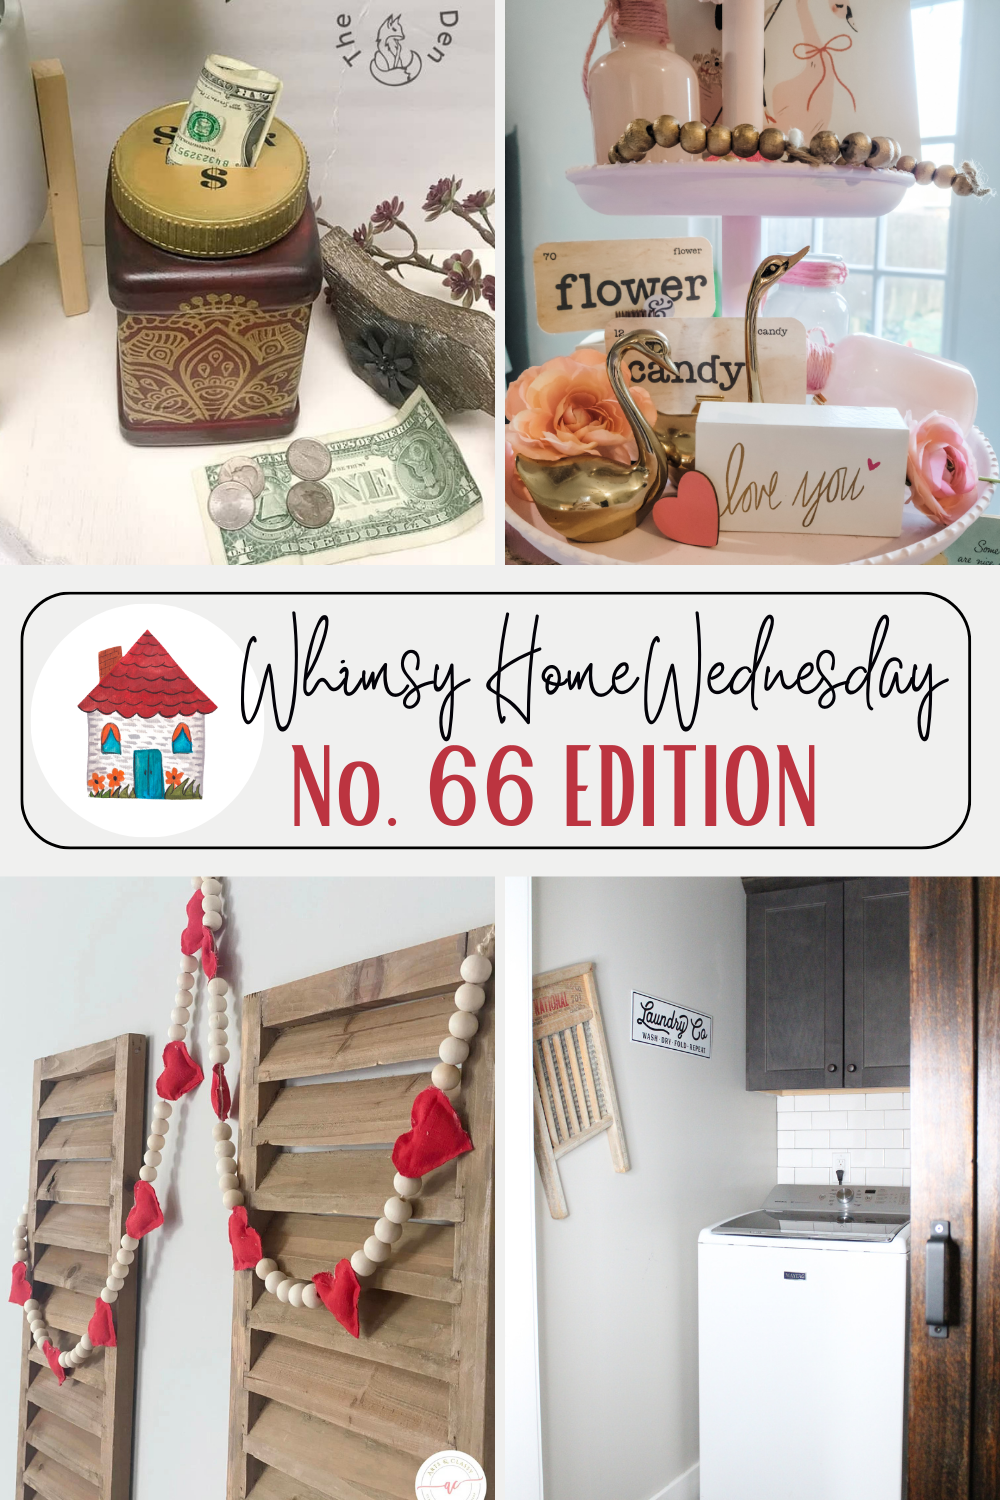 Join us on Whimsy Home Wednesday Blog Link Party No. 66 and see host projects, the features from the previous week and link up your posts!